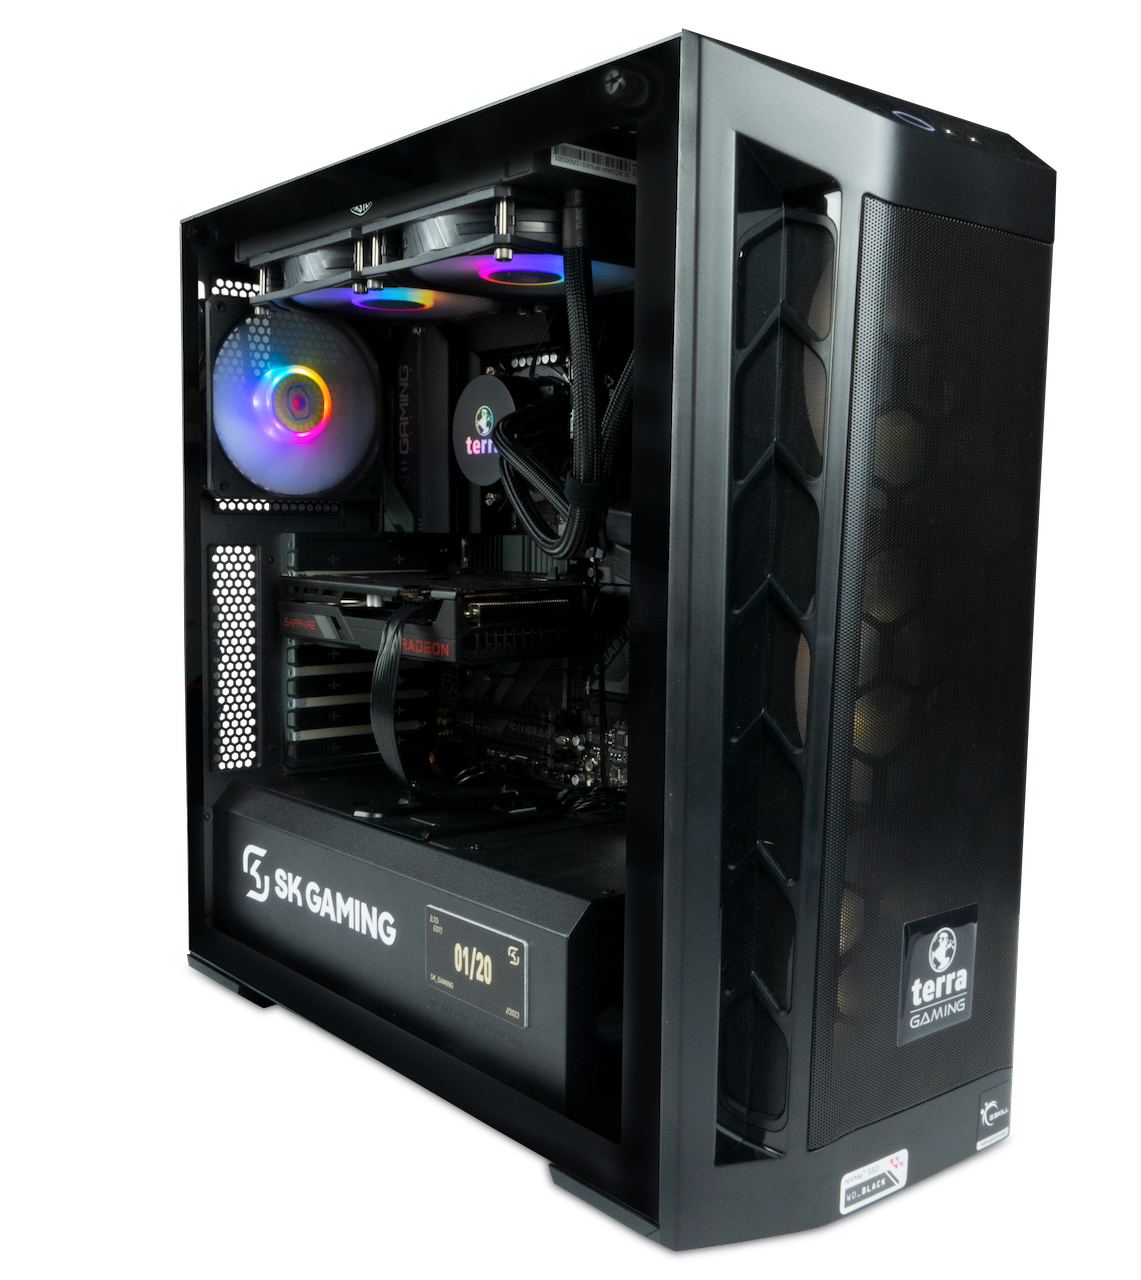 Image 1 of TERRA ELITE 1 – Gaming PC (Limited Edition)